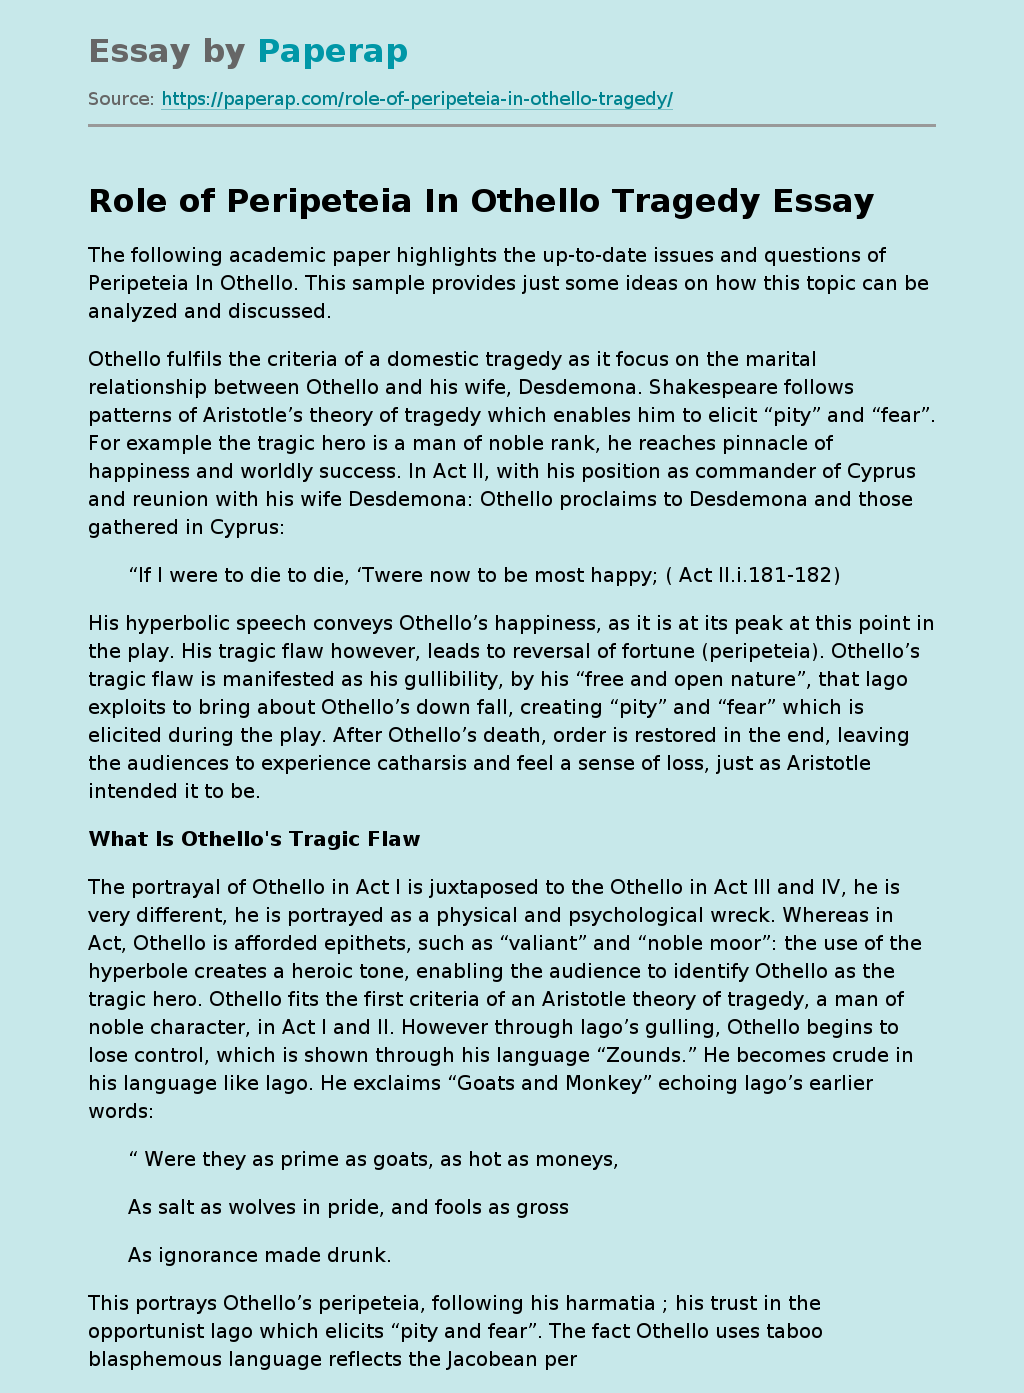 Role of Peripeteia In Othello Tragedy